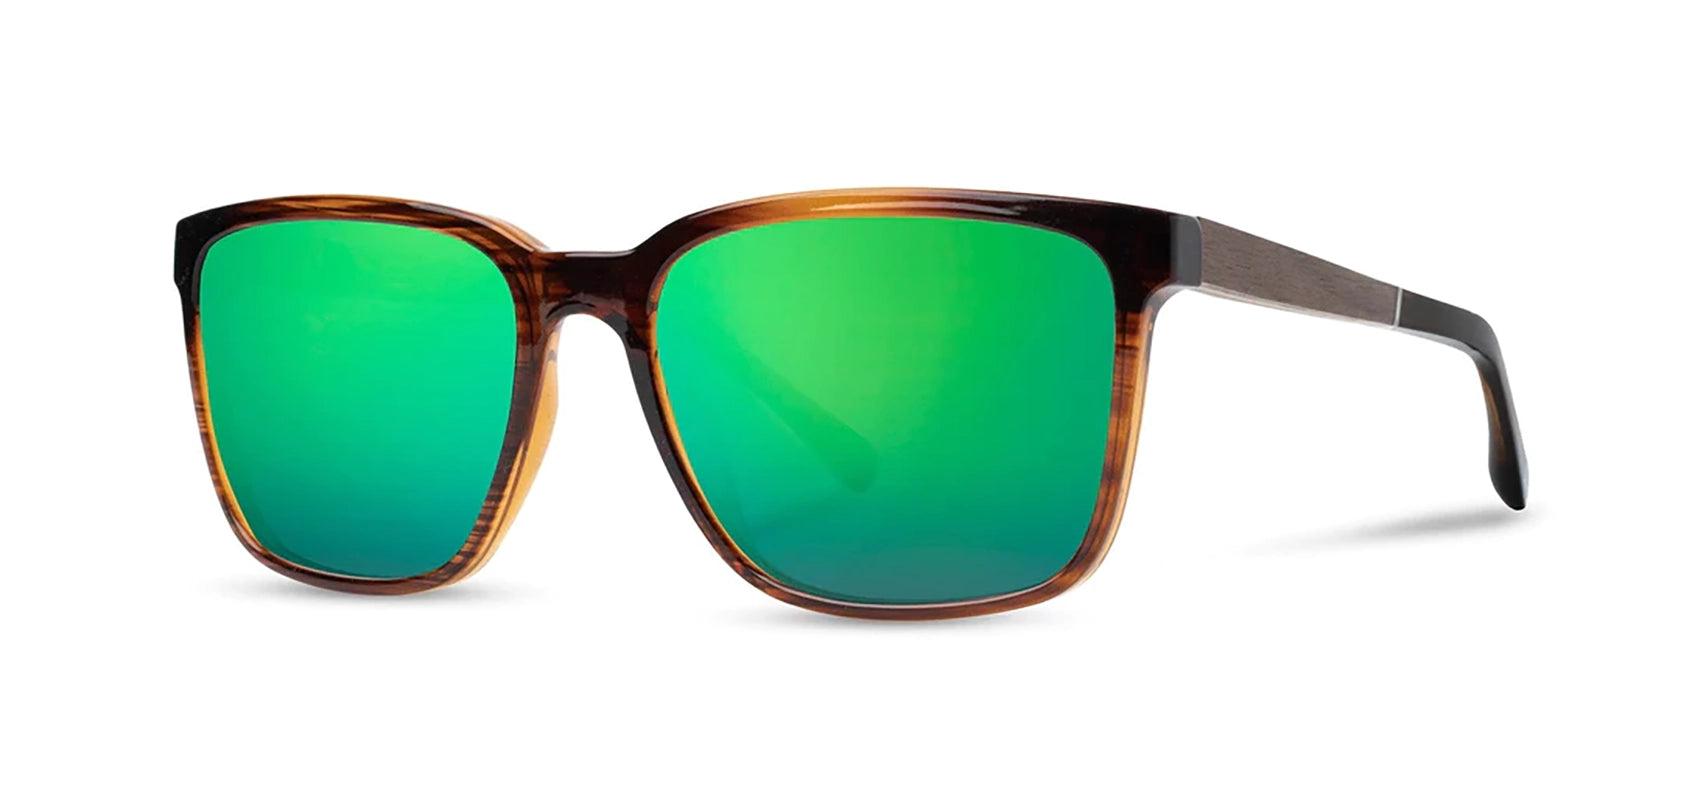 Camp Crag Sunglasses in Tortoise with walnut frames,  HD + Green flash Polarized lenses, front angled view